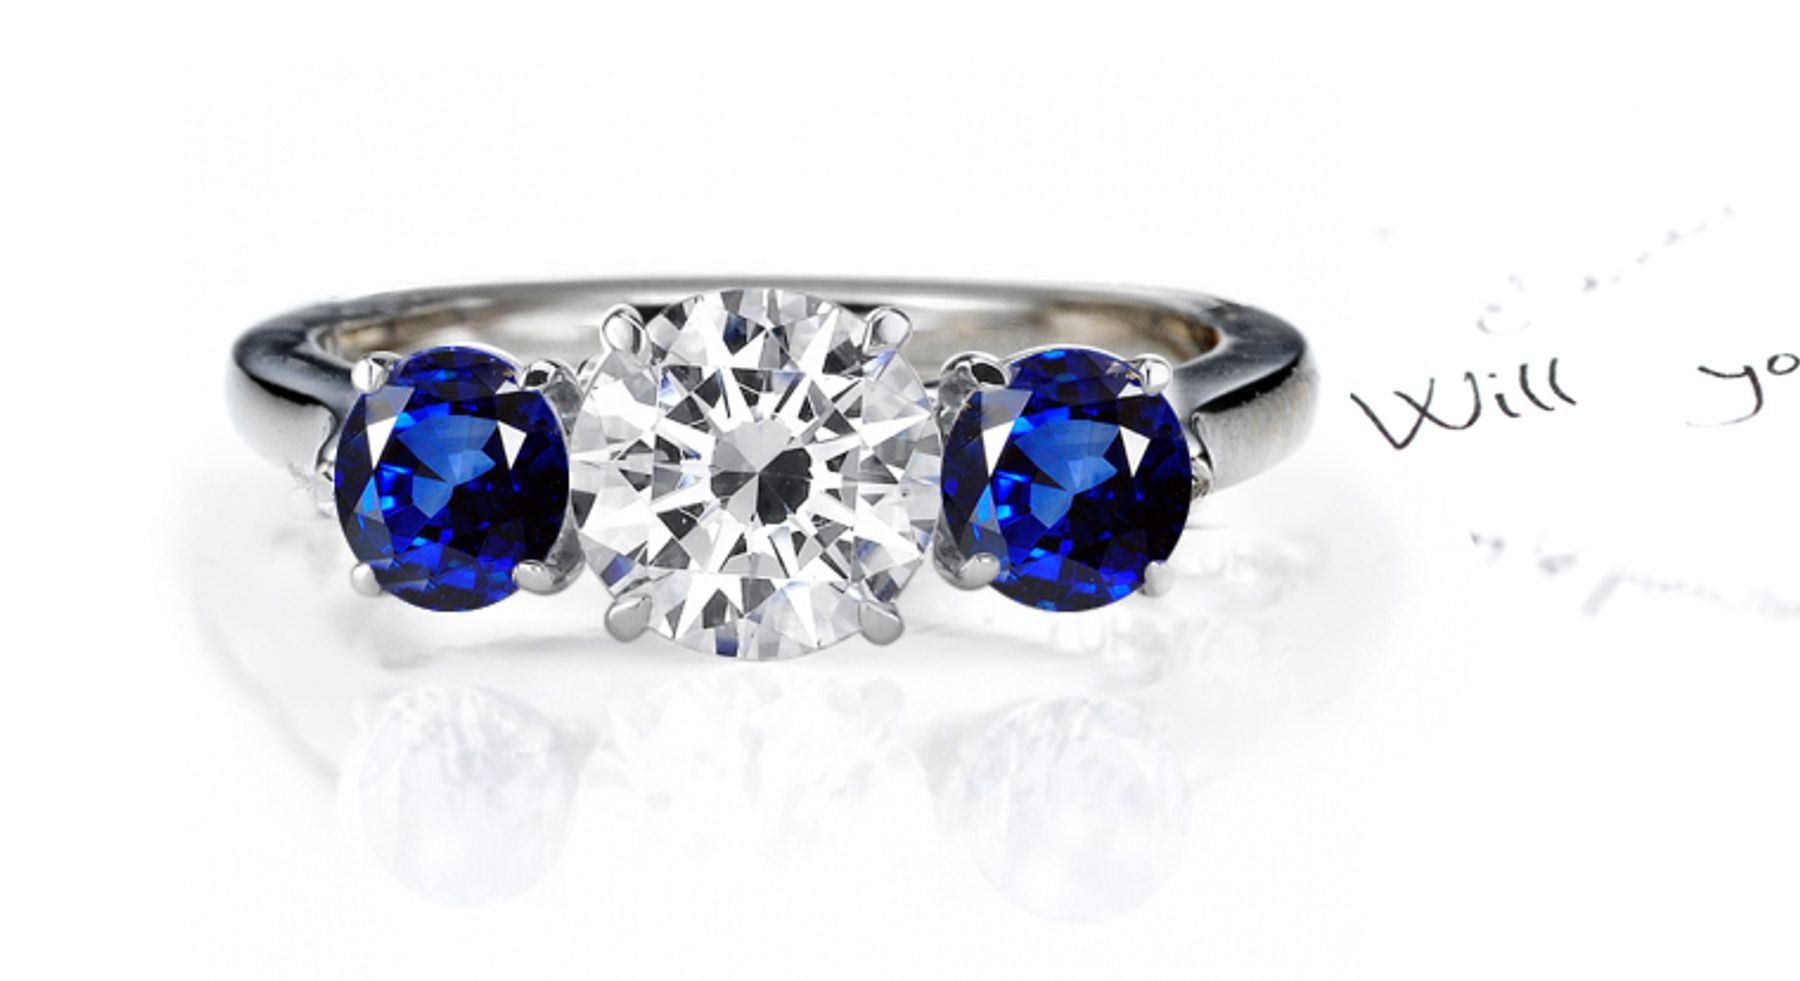 Classical Essential:An Exceptional Royal Blue Sapphire & Diamond Engagement Ring. 